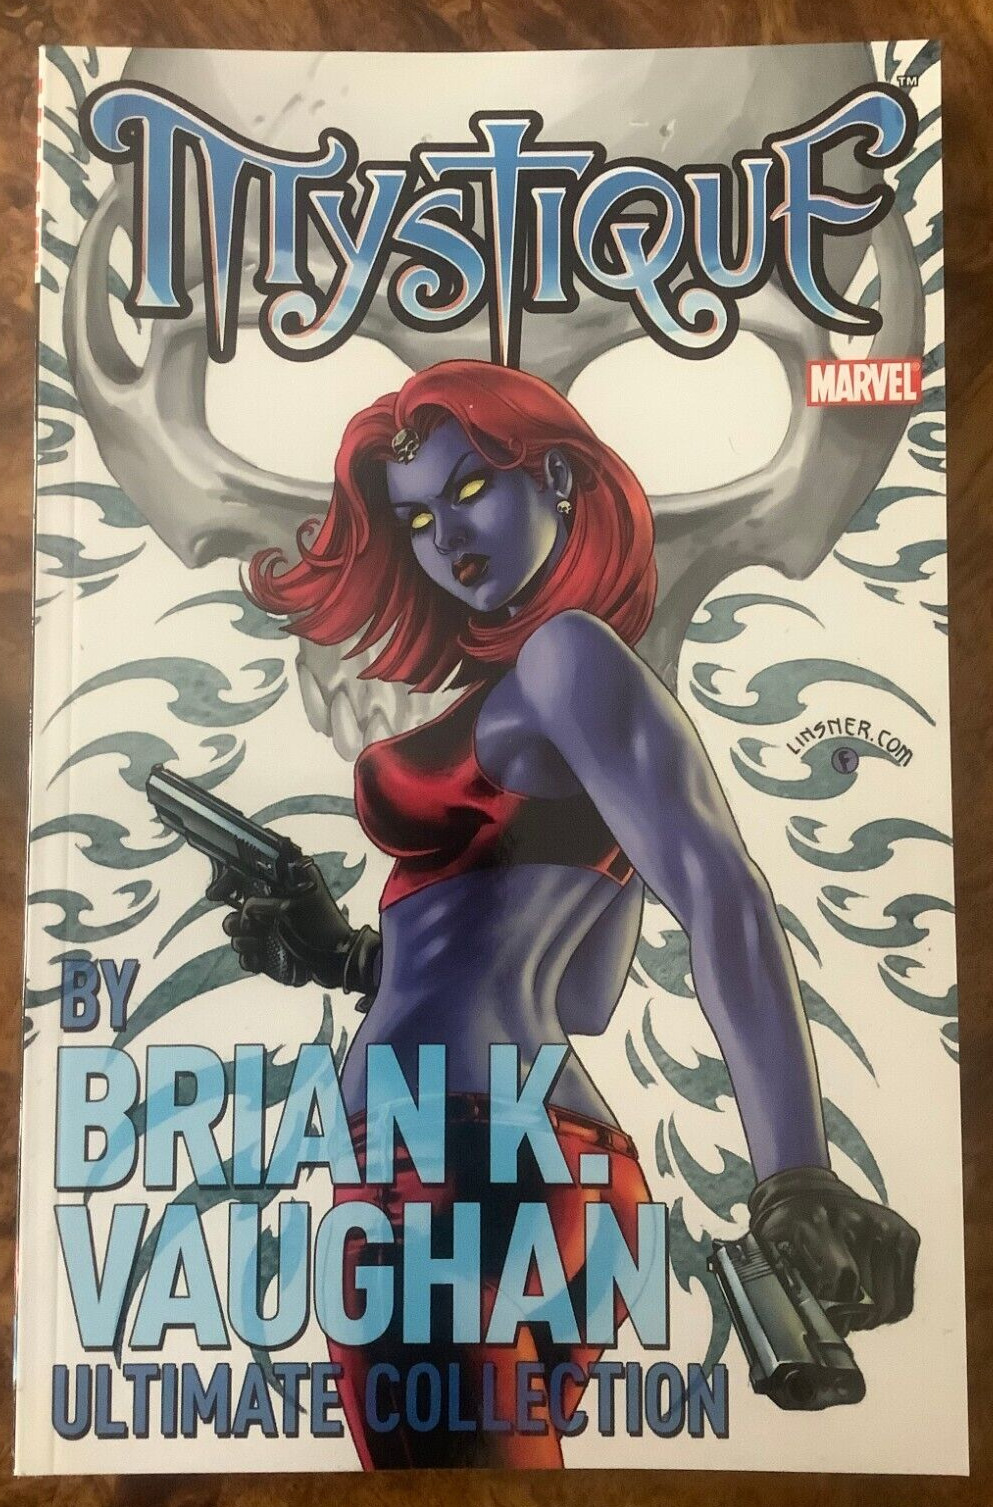 Mystique by Brian K. Vaughan Ultimate Collection TPB X-Men Marvel Comics